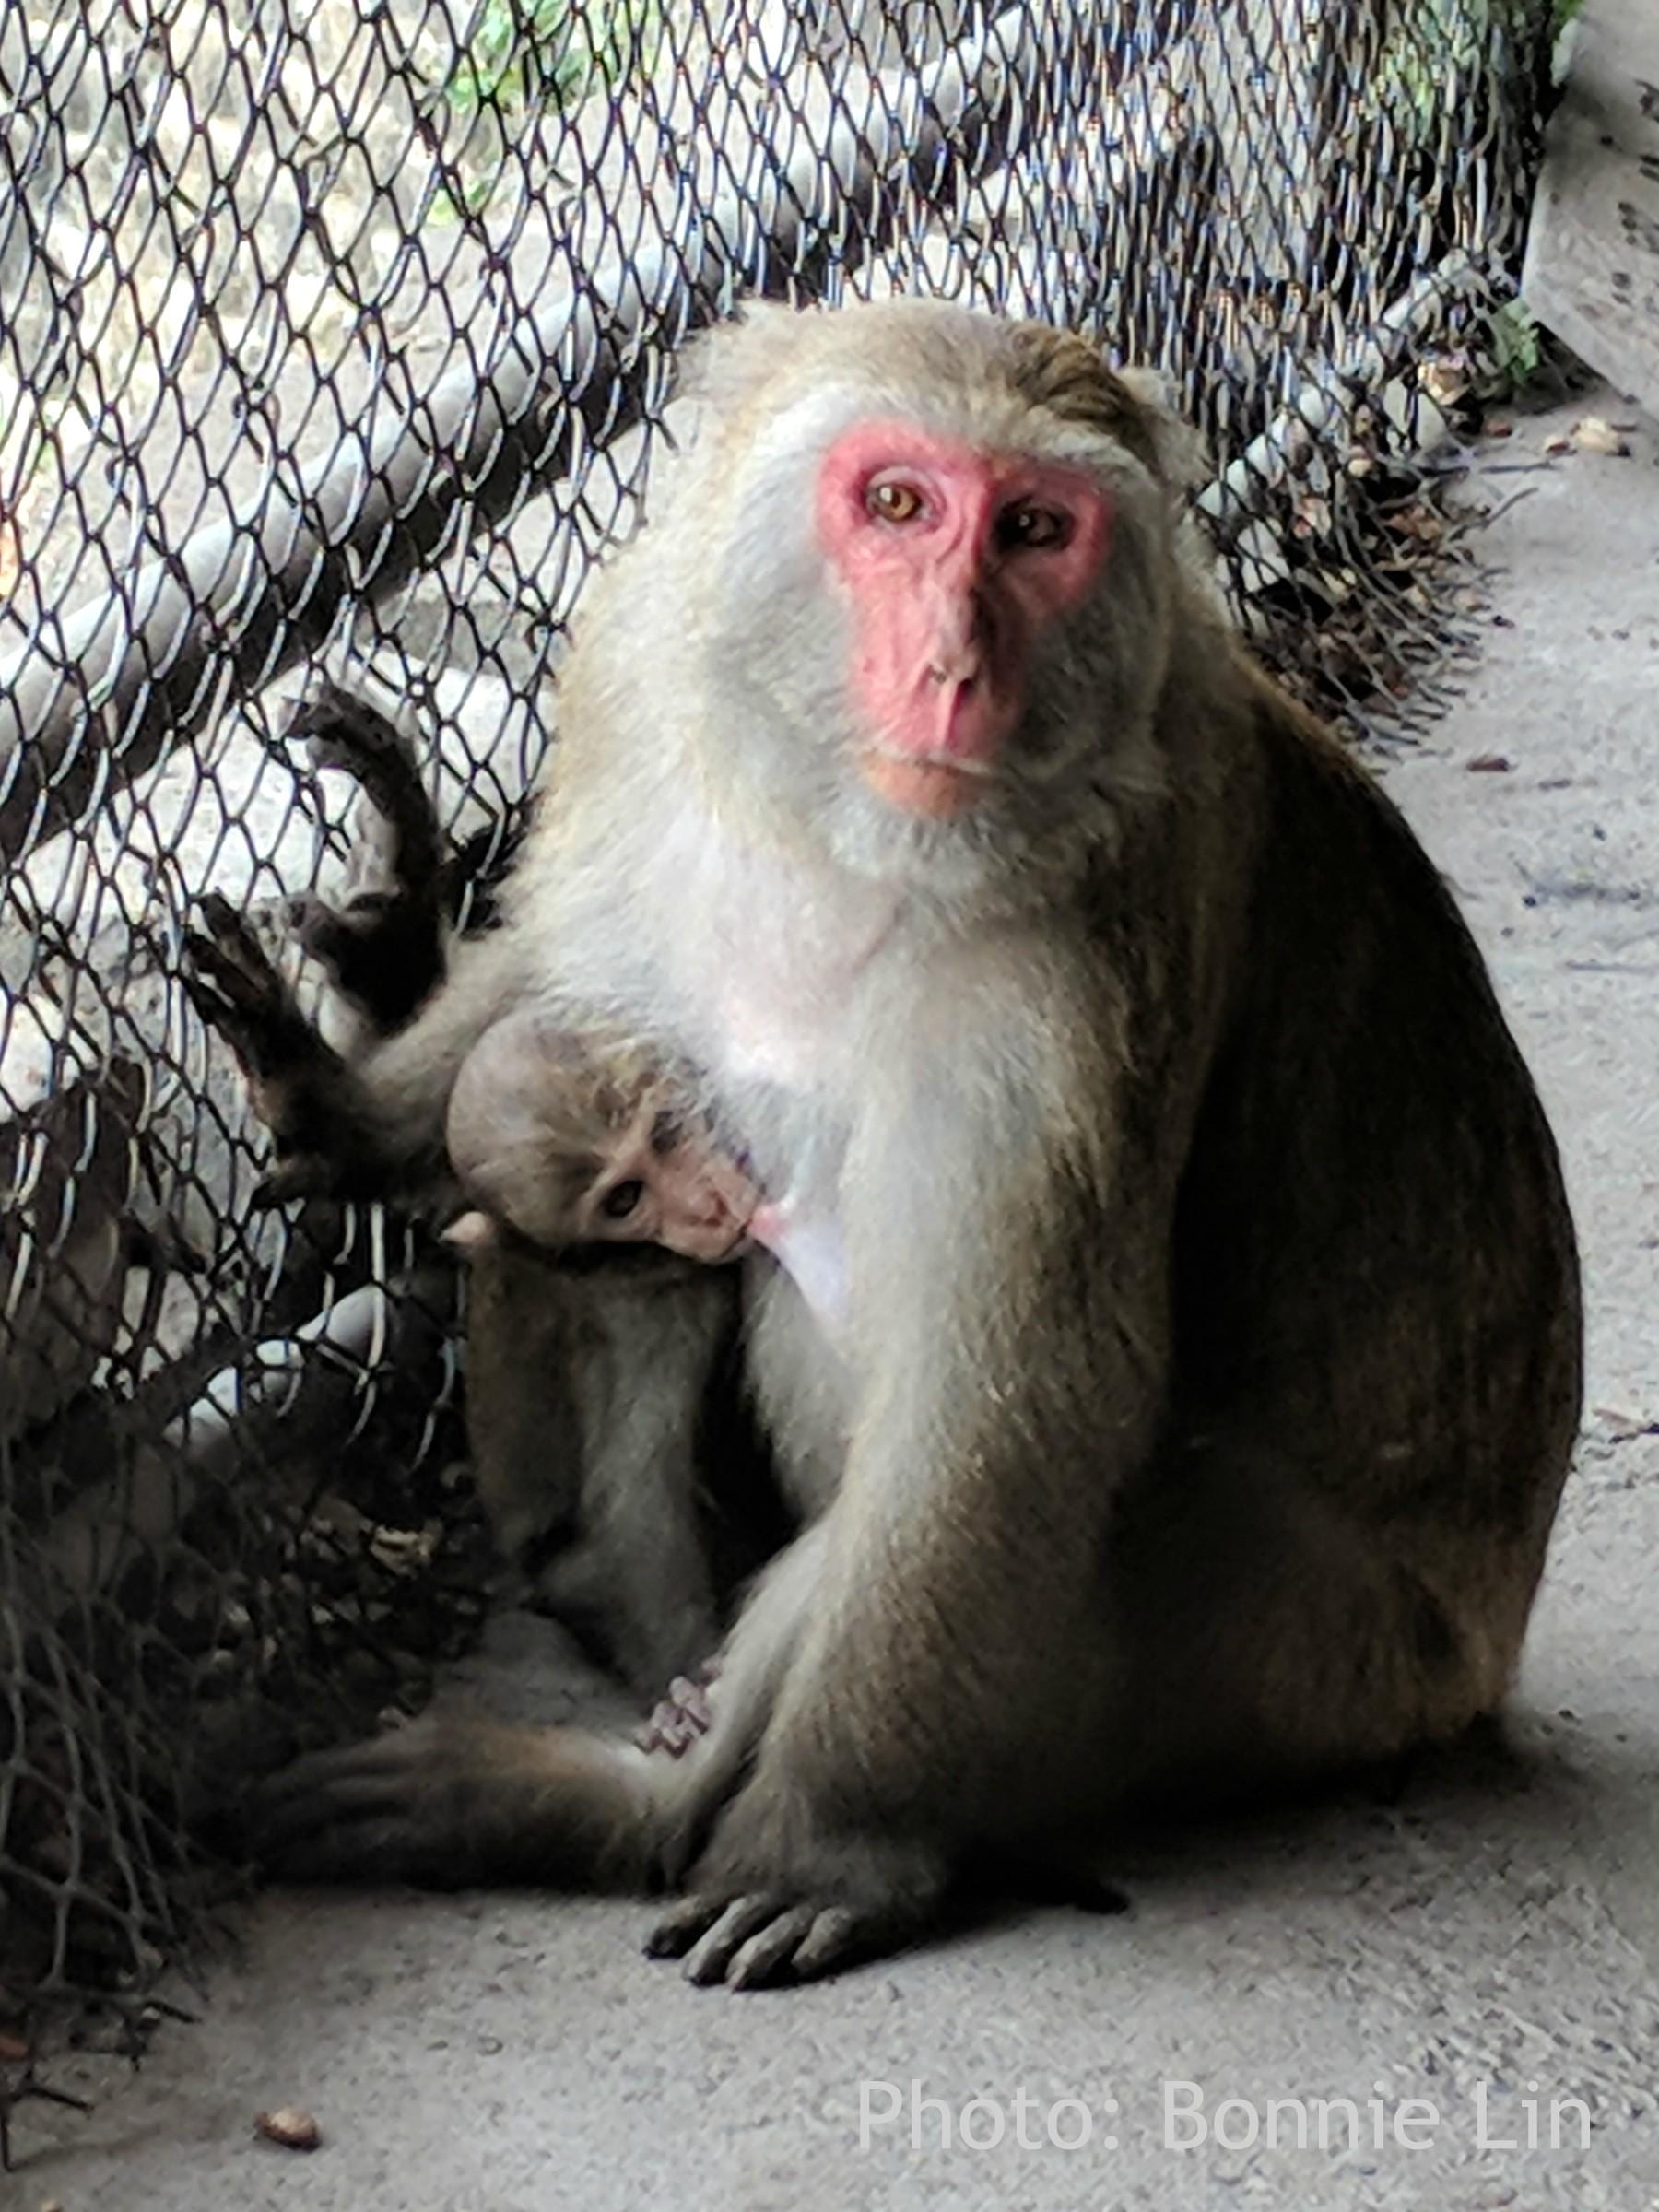 Mother and child monkey